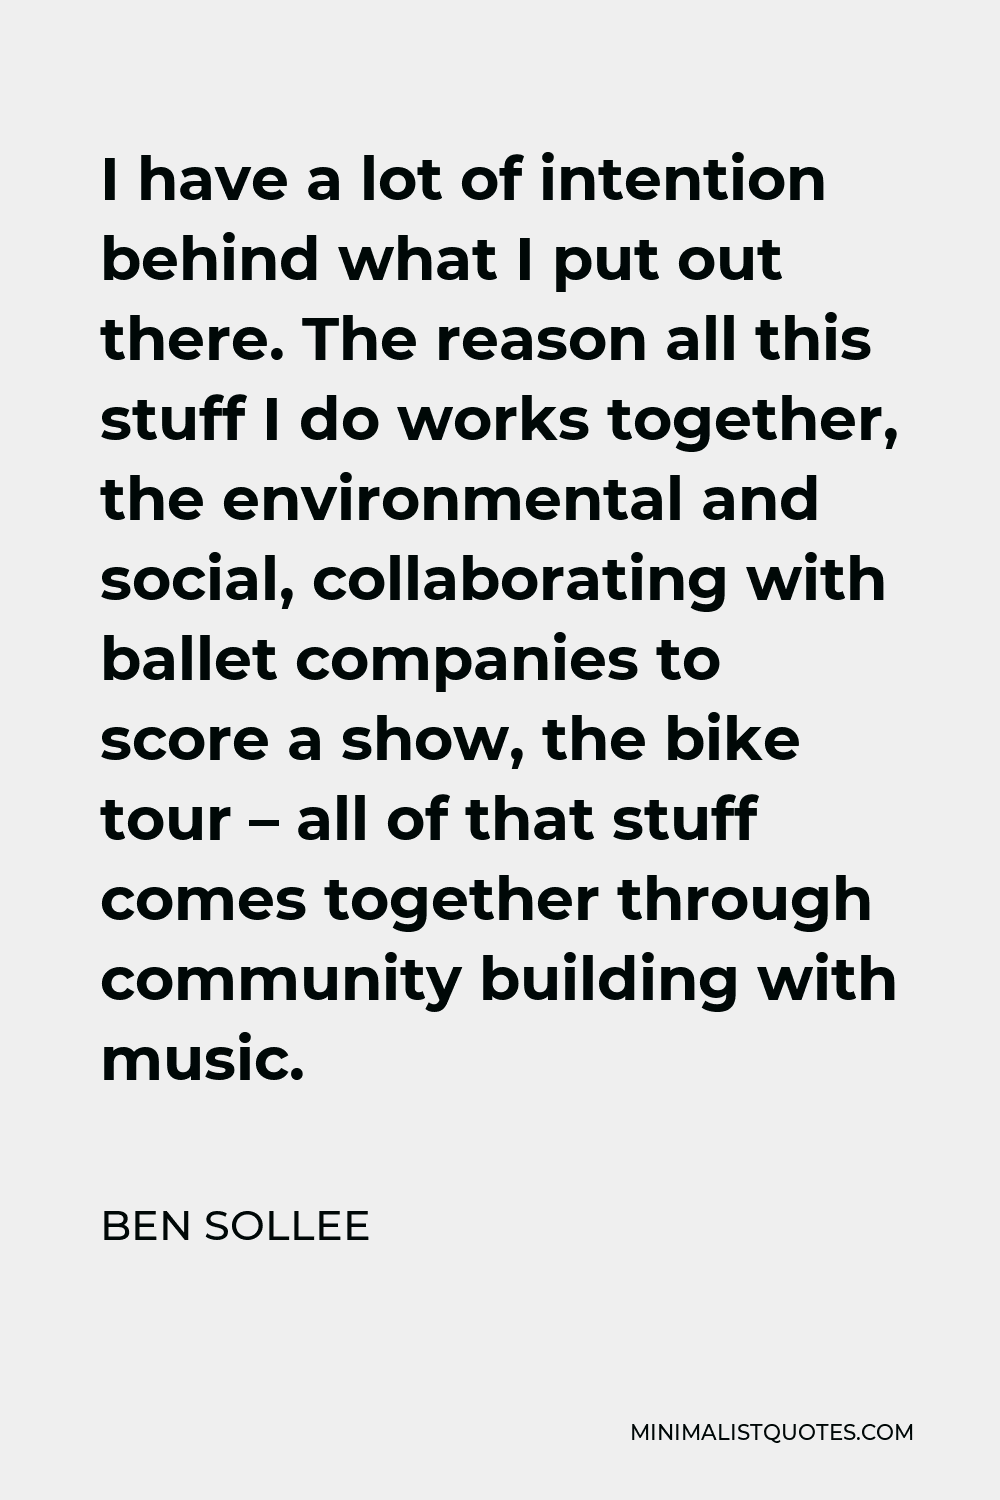 Ben Sollee Quote - I have a lot of intention behind what I put out there. The reason all this stuff I do works together, the environmental and social, collaborating with ballet companies to score a show, the bike tour – all of that stuff comes together through community building with music.